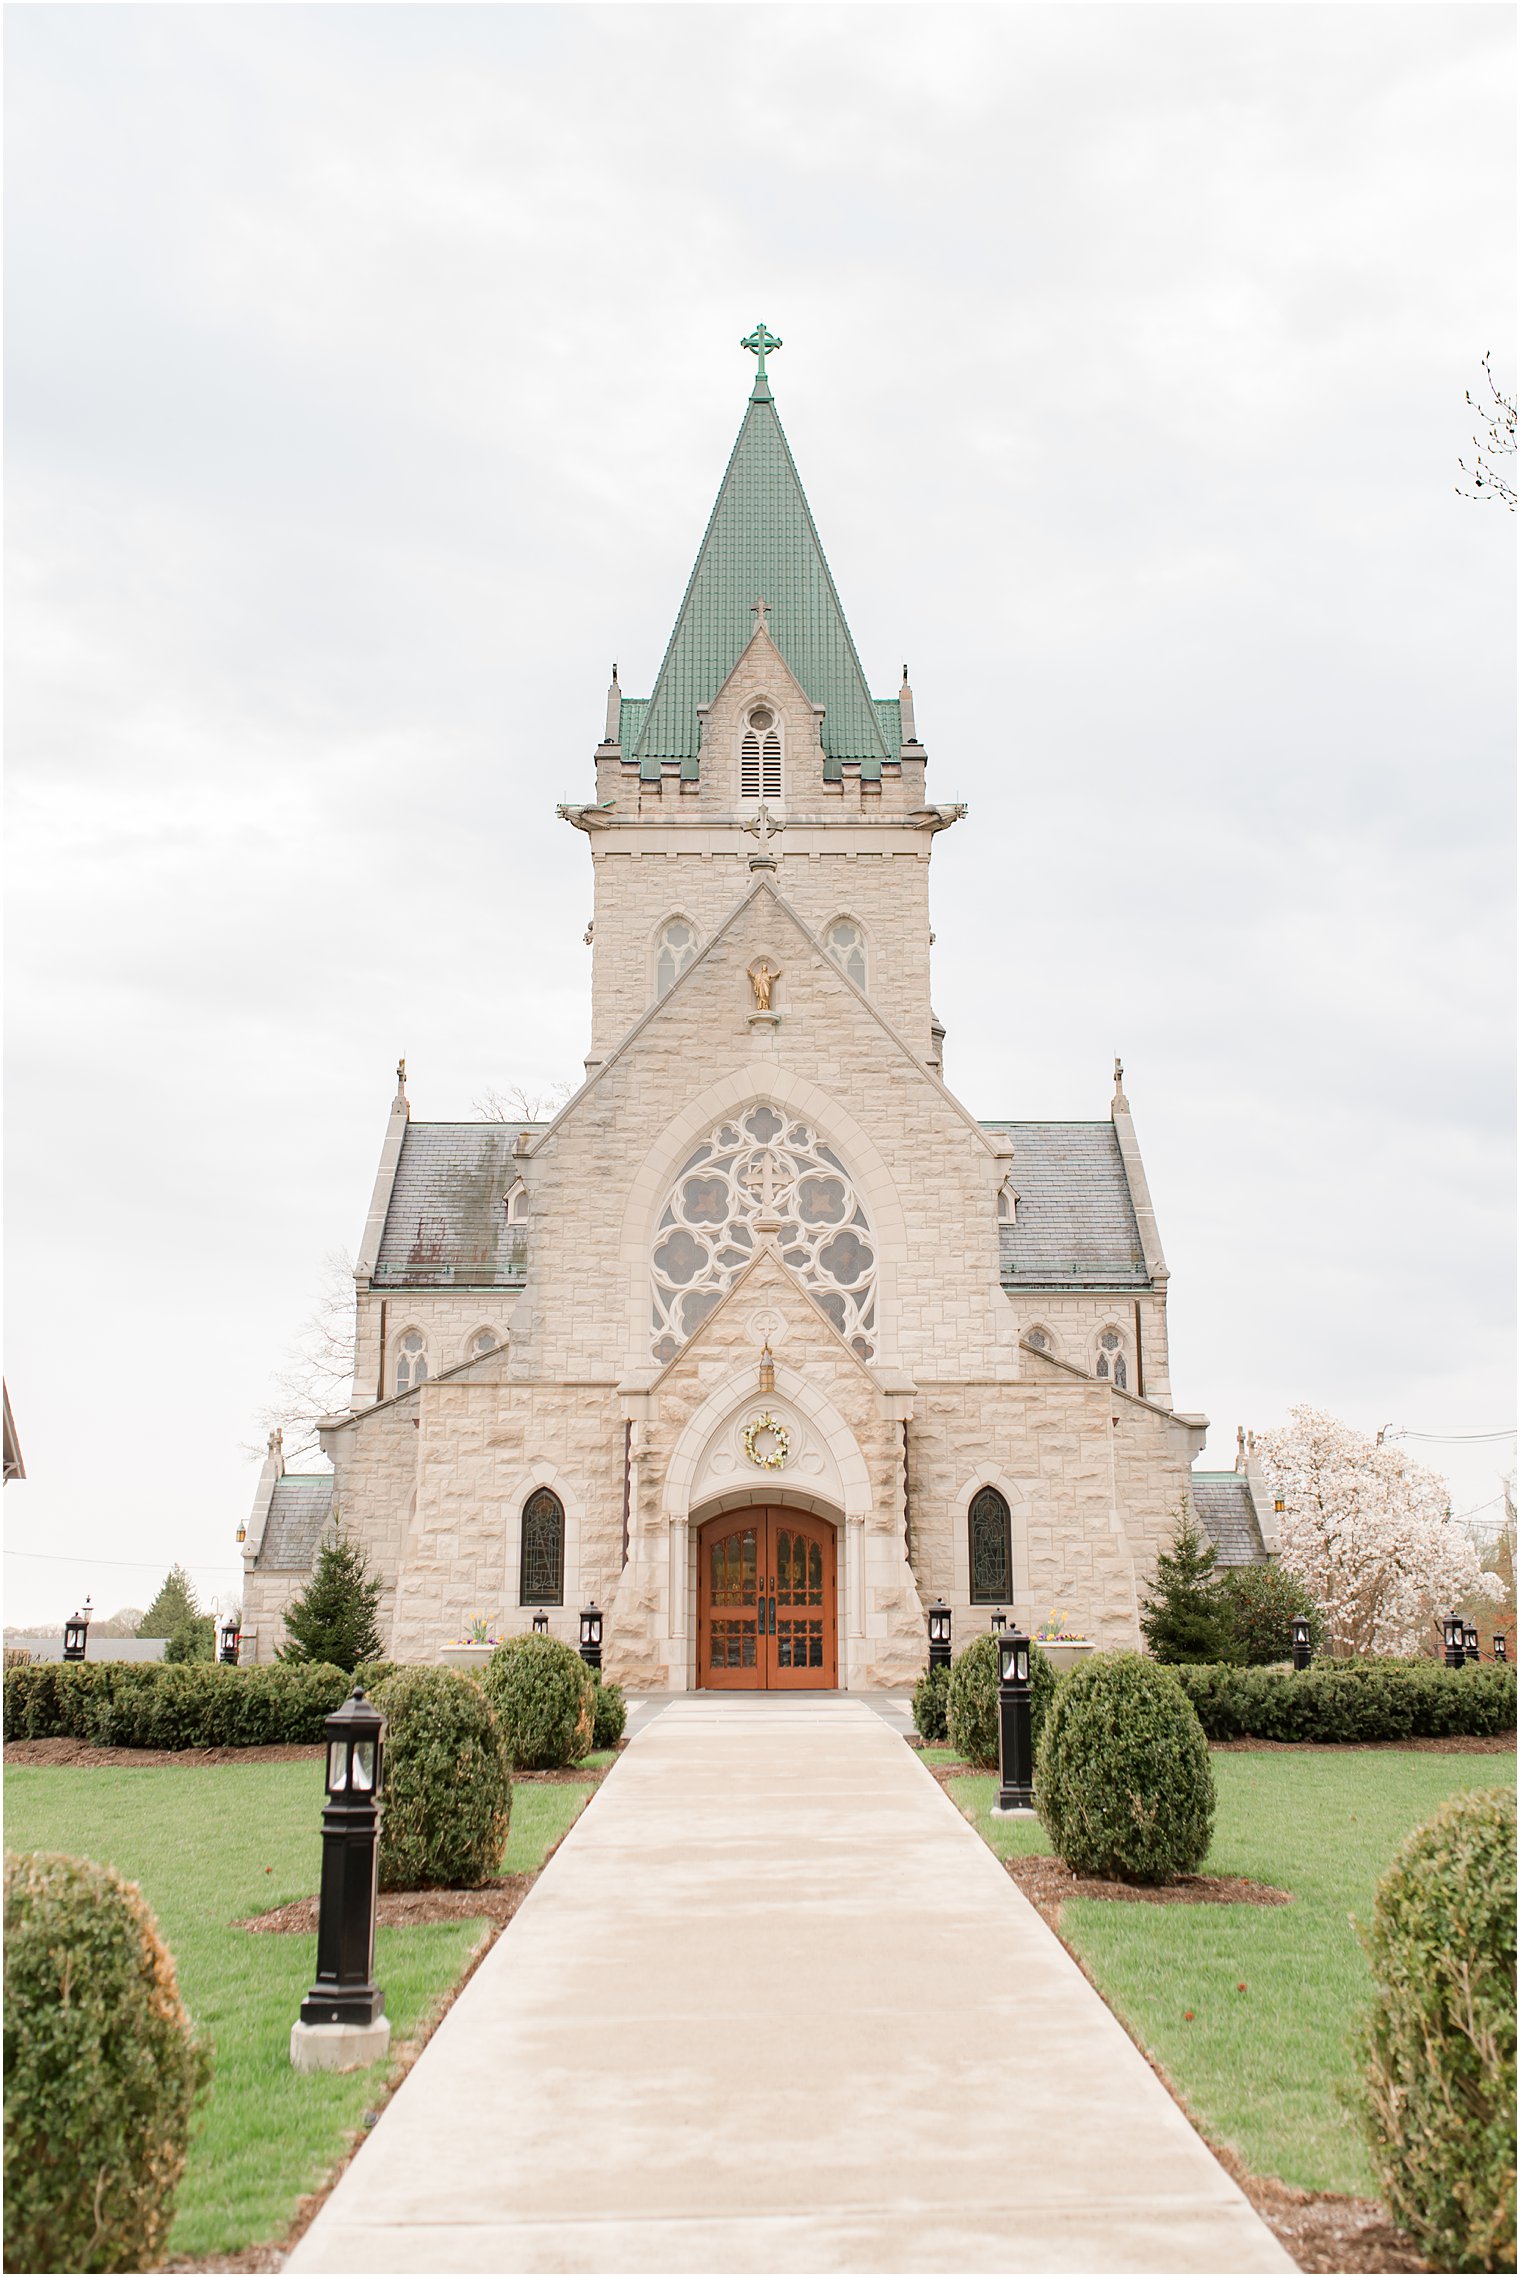 St. Vincent's Martyr Catholic Church in New Jersey